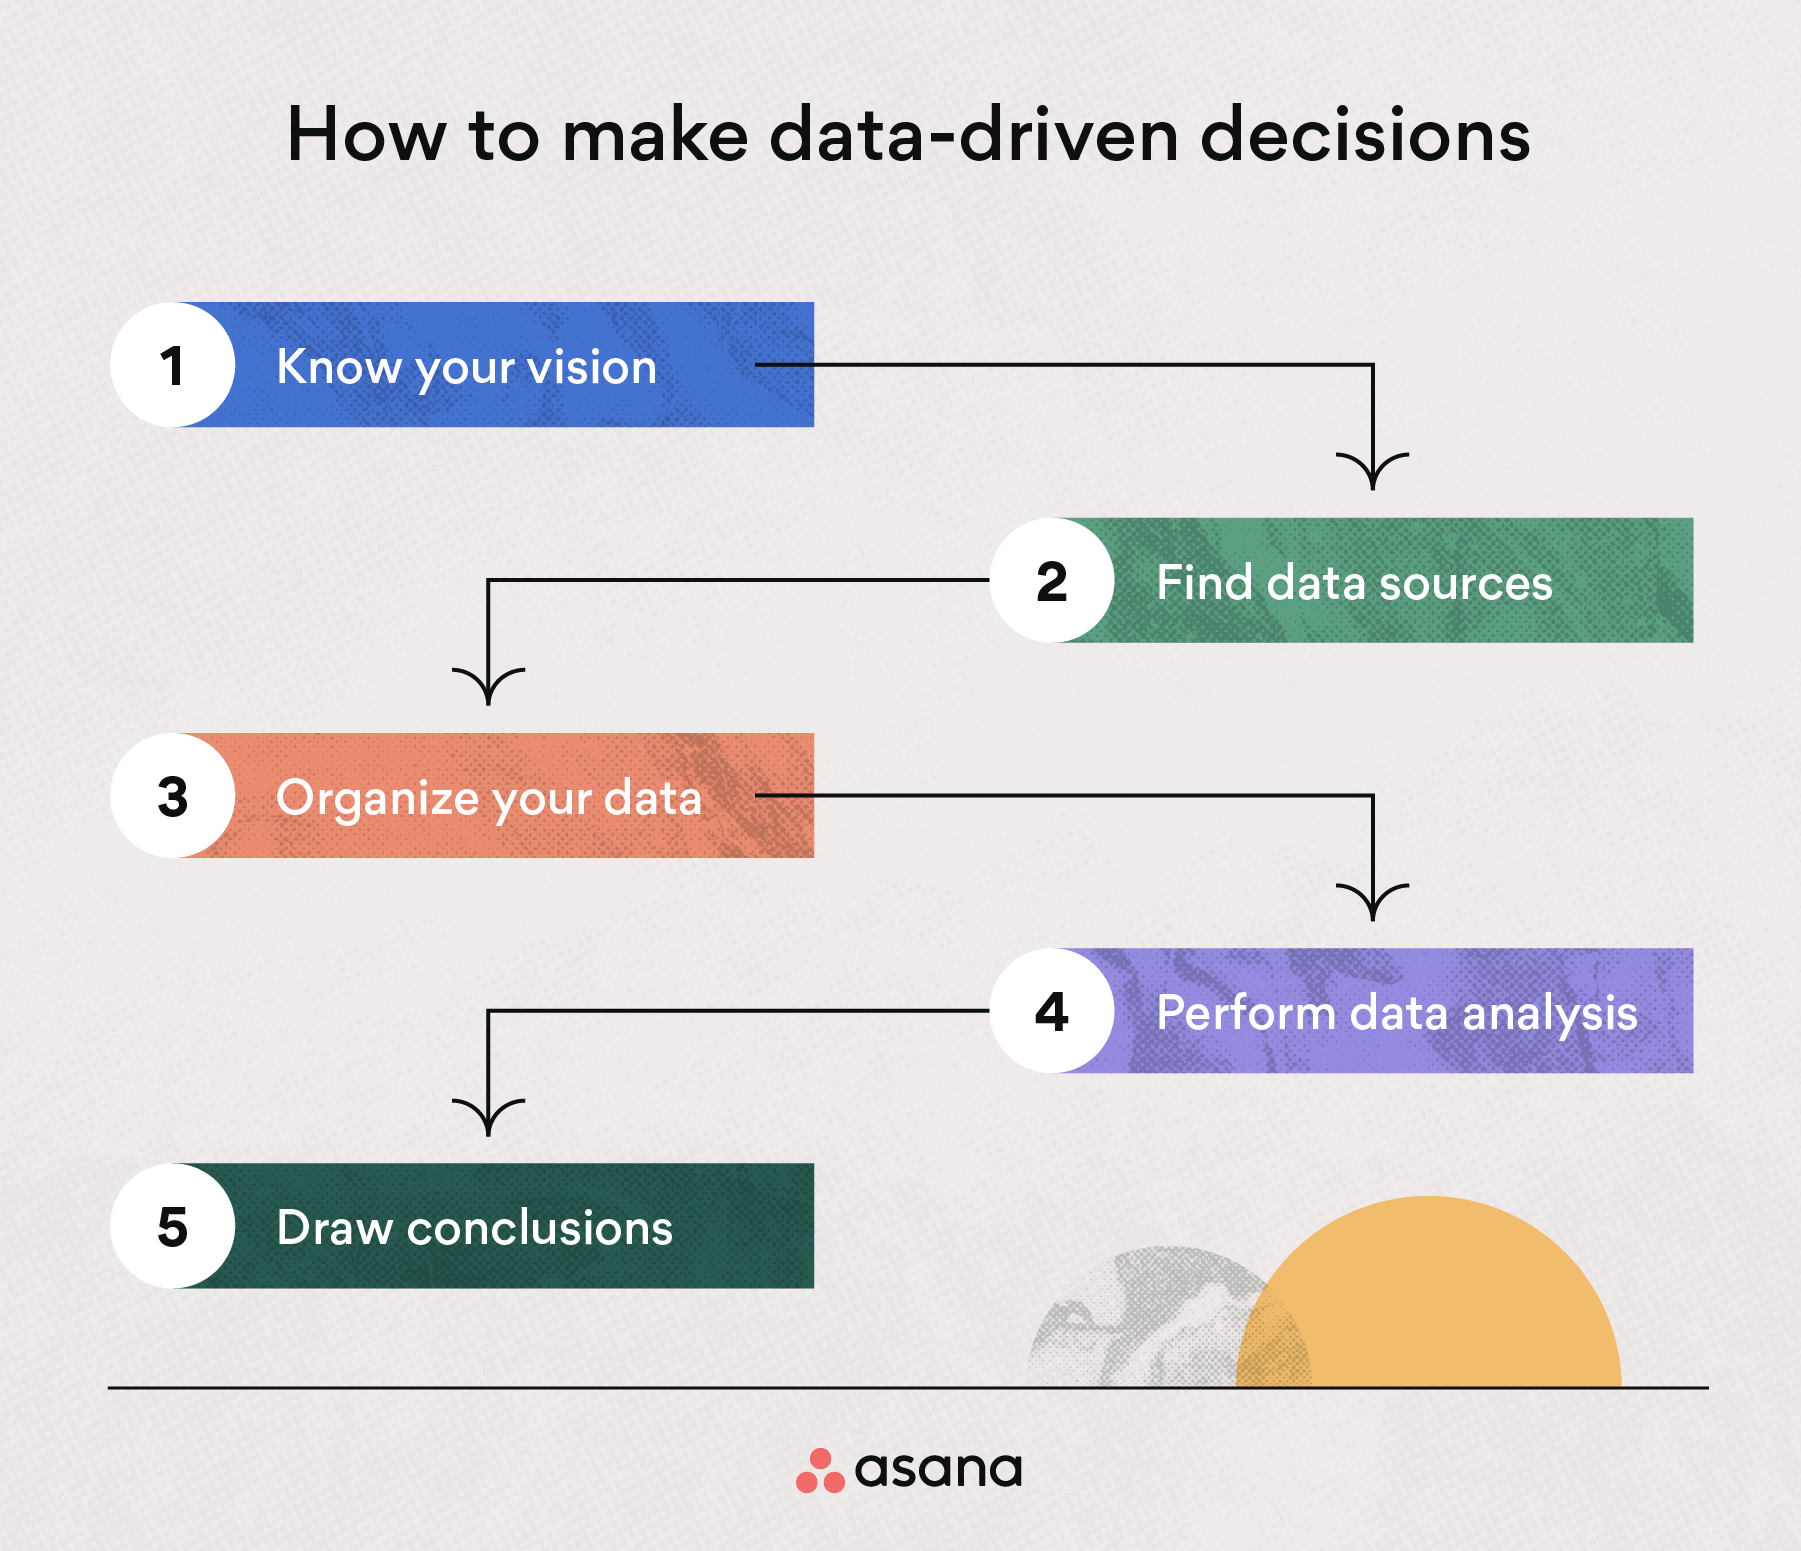 5 steps for making data-driven decisions